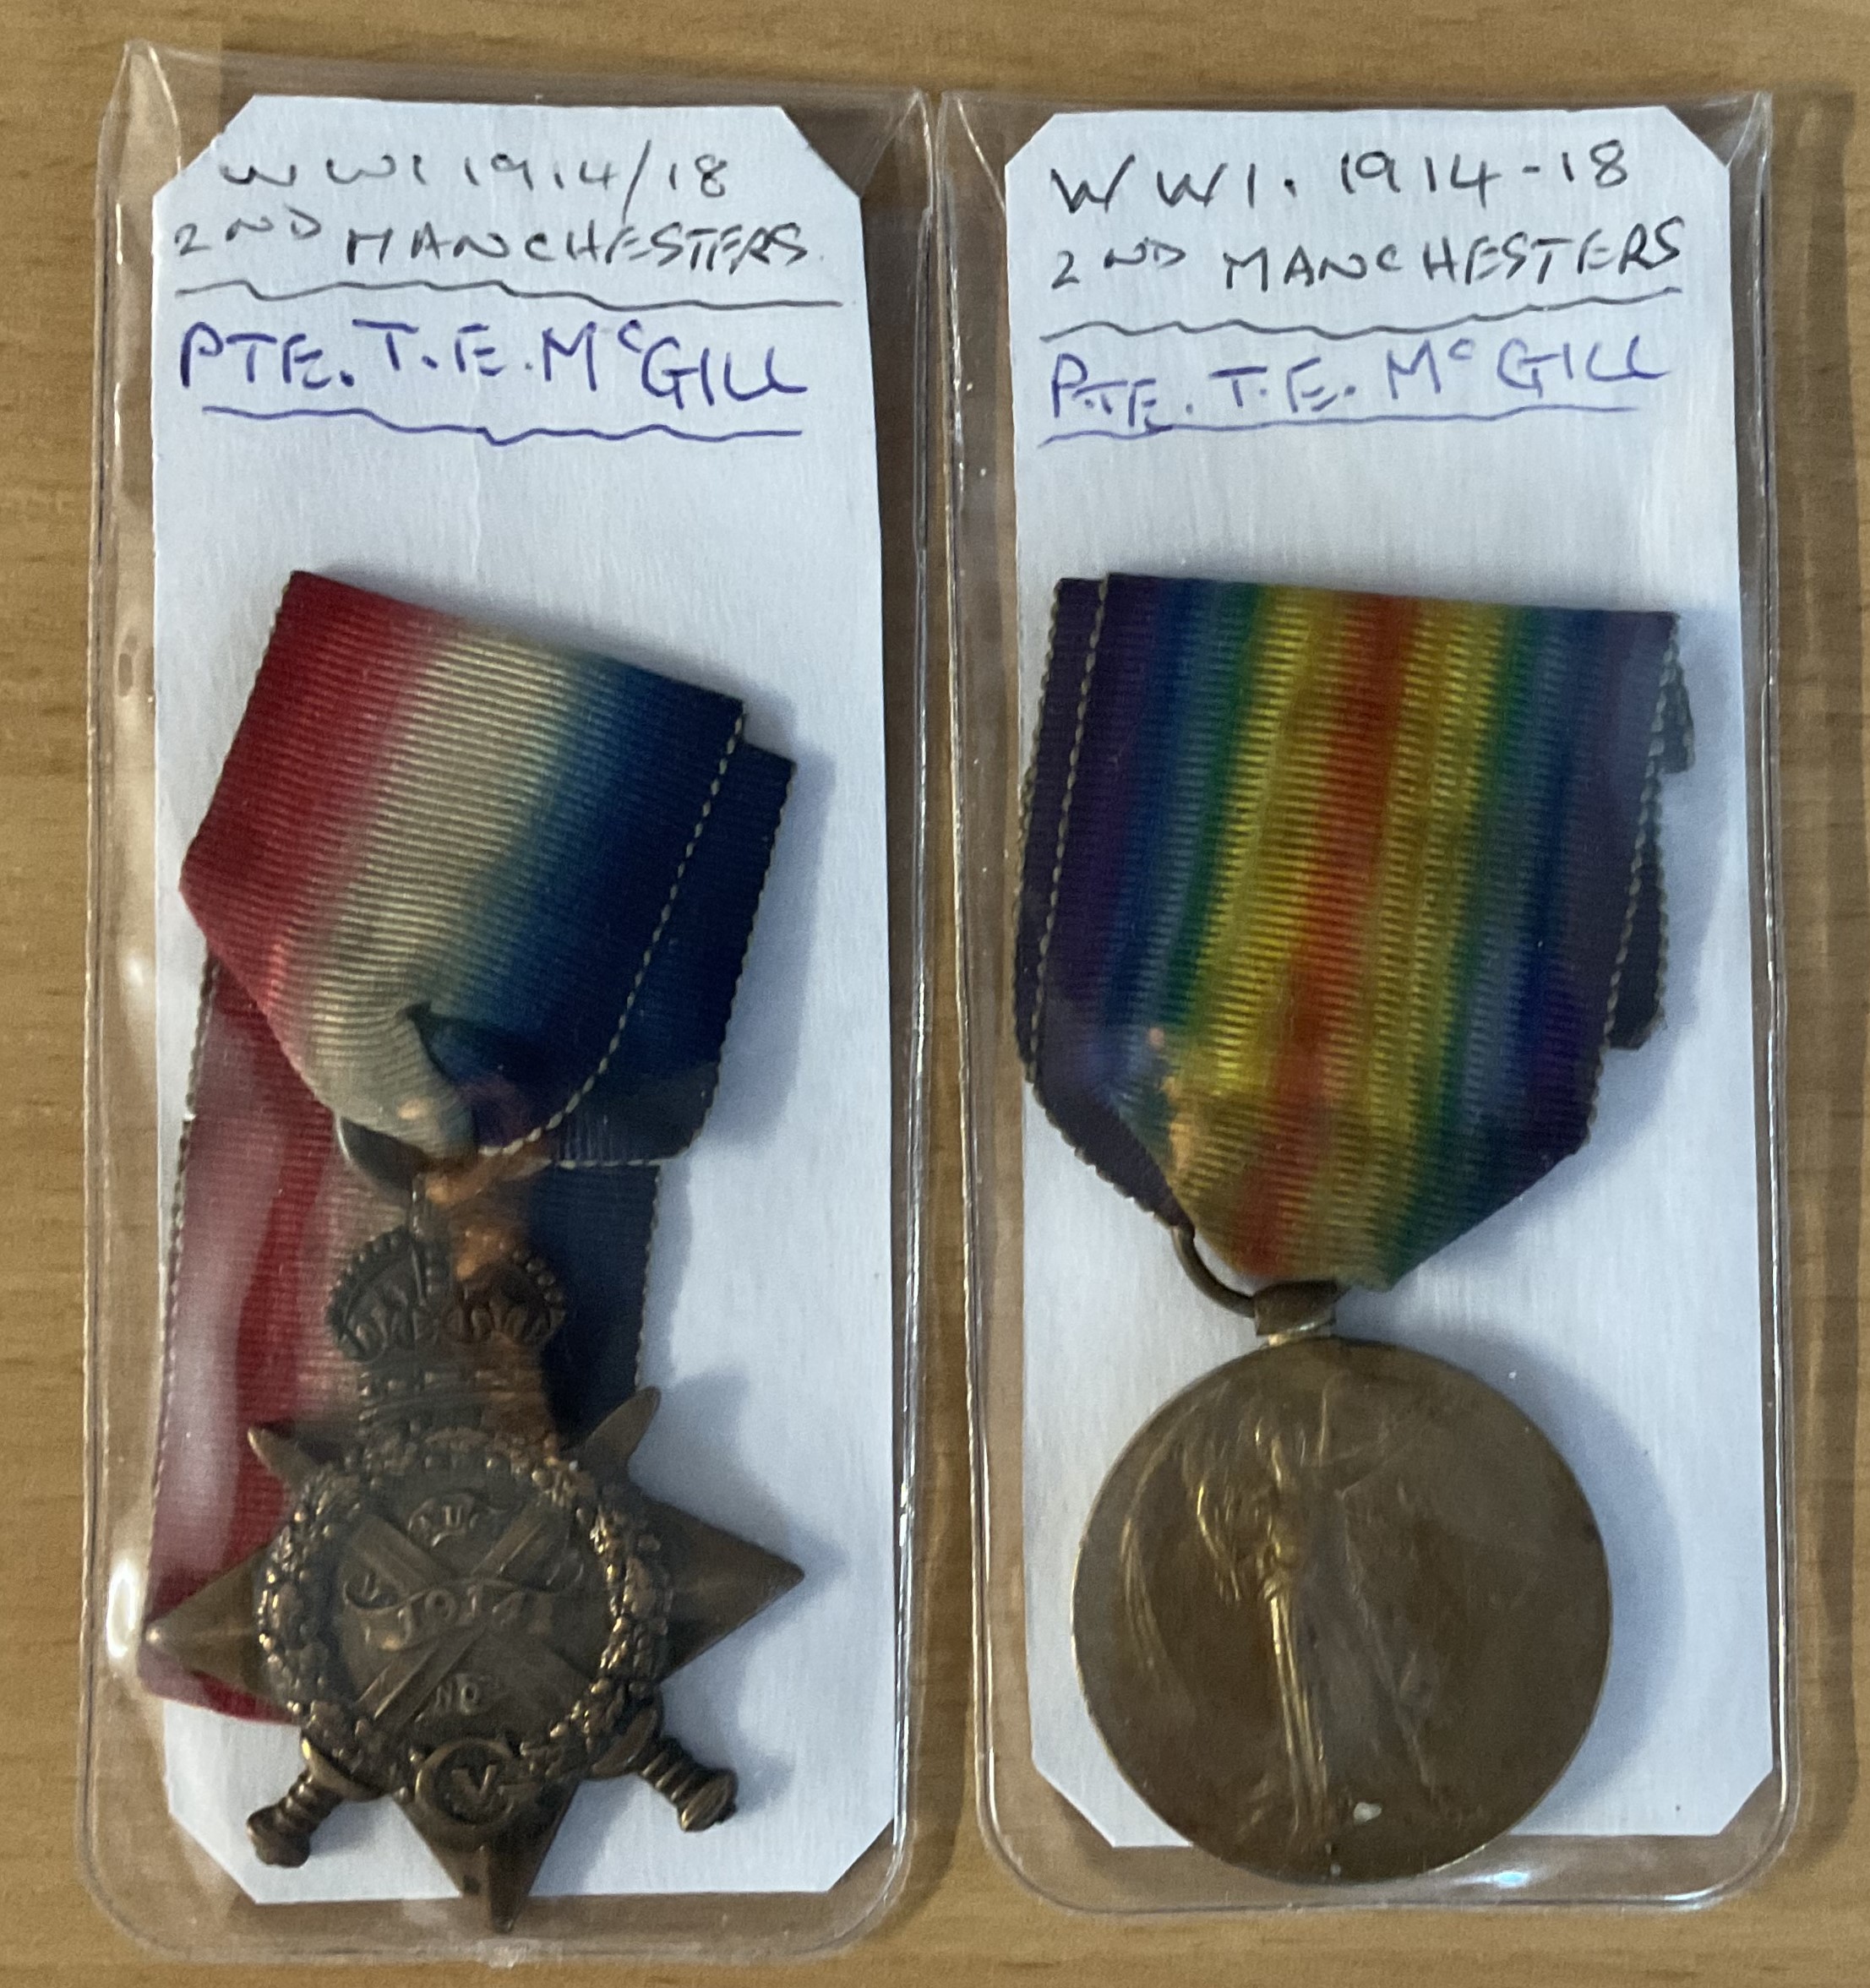 WW1 Pair of War Medals Awarded to Pte Thomas Edward McGill (8951). Medals Include The Victory